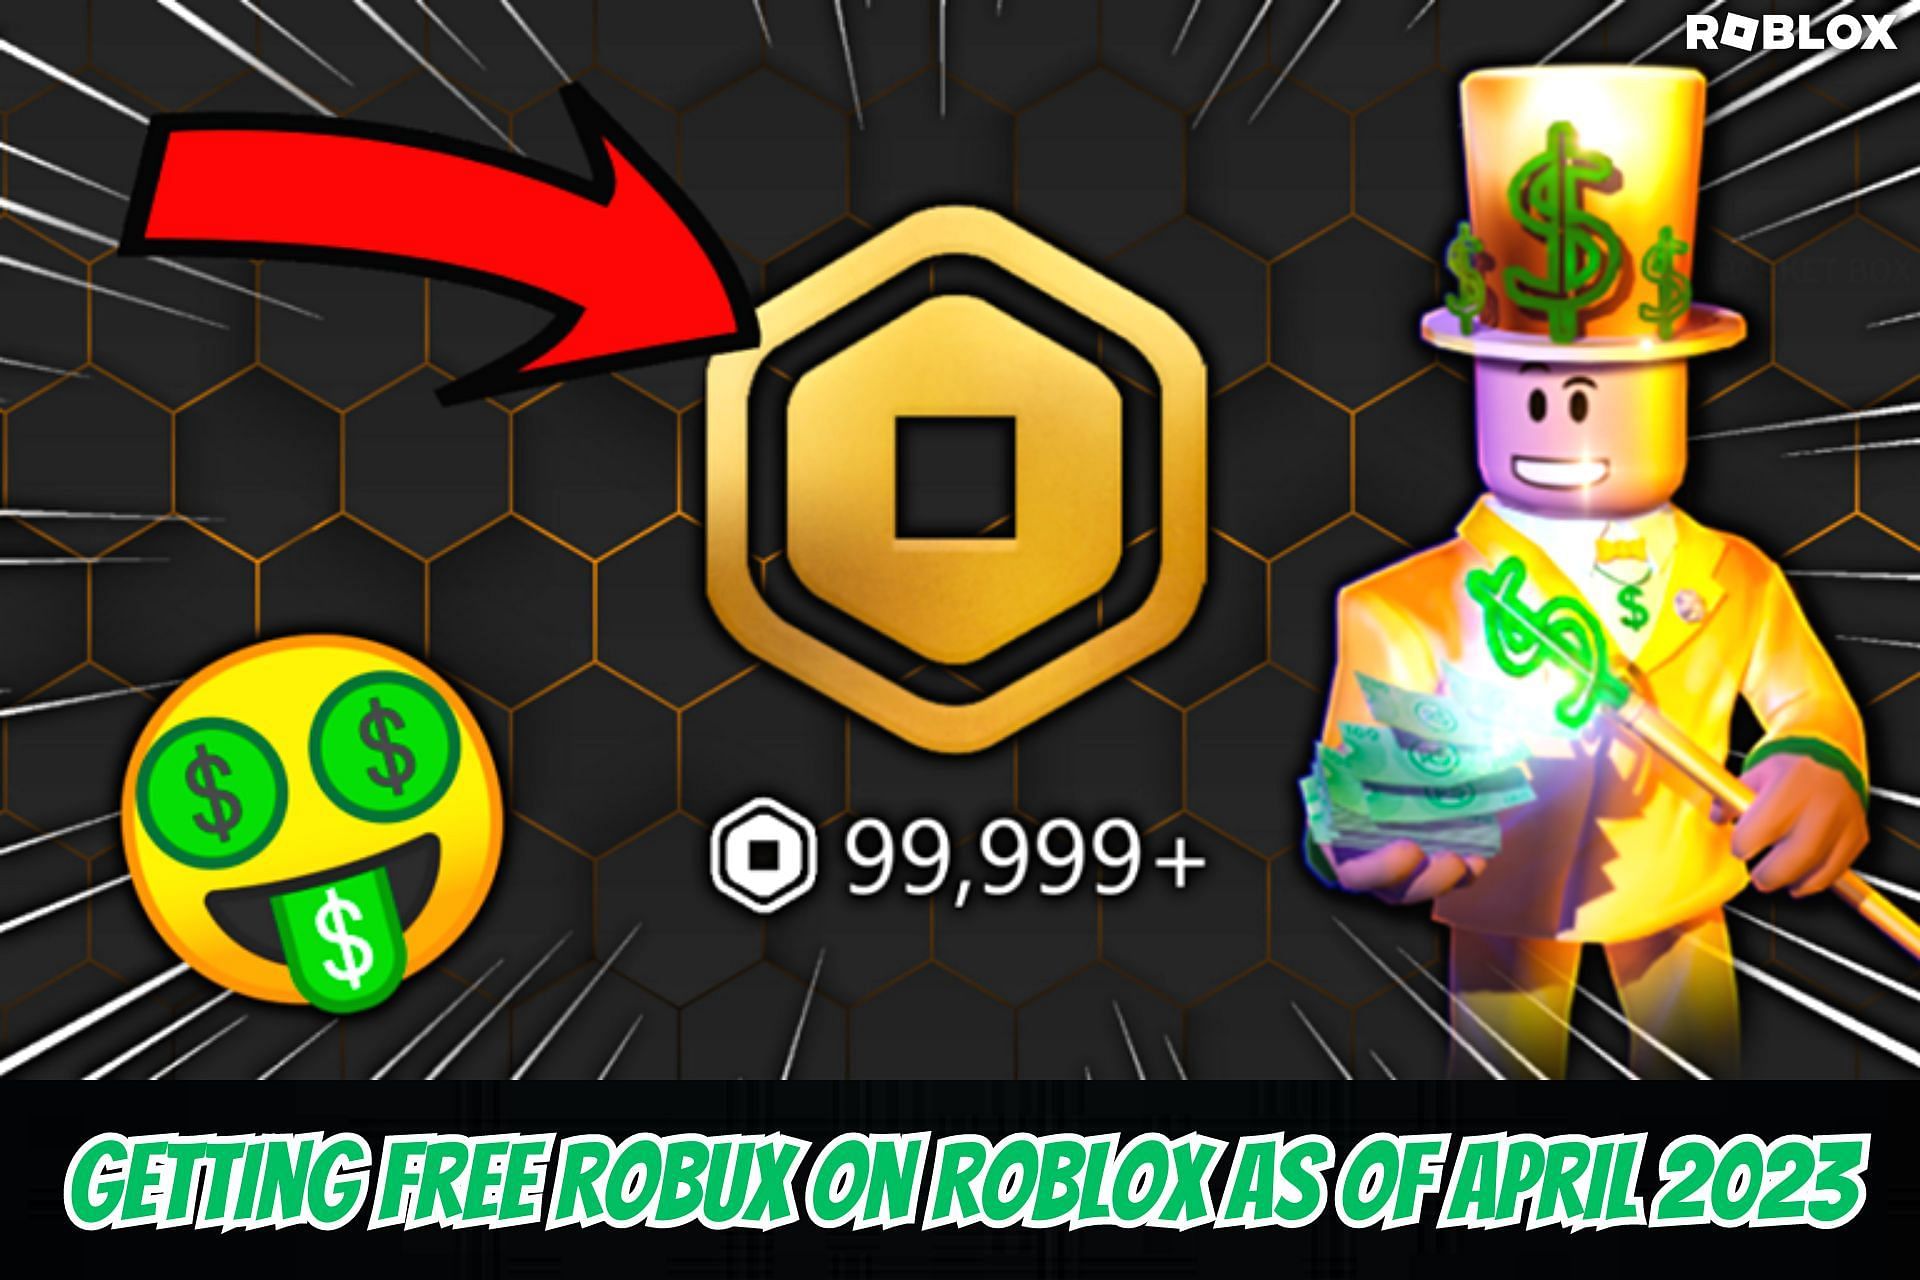 How do you get free Robux on Roblox as of April 2023